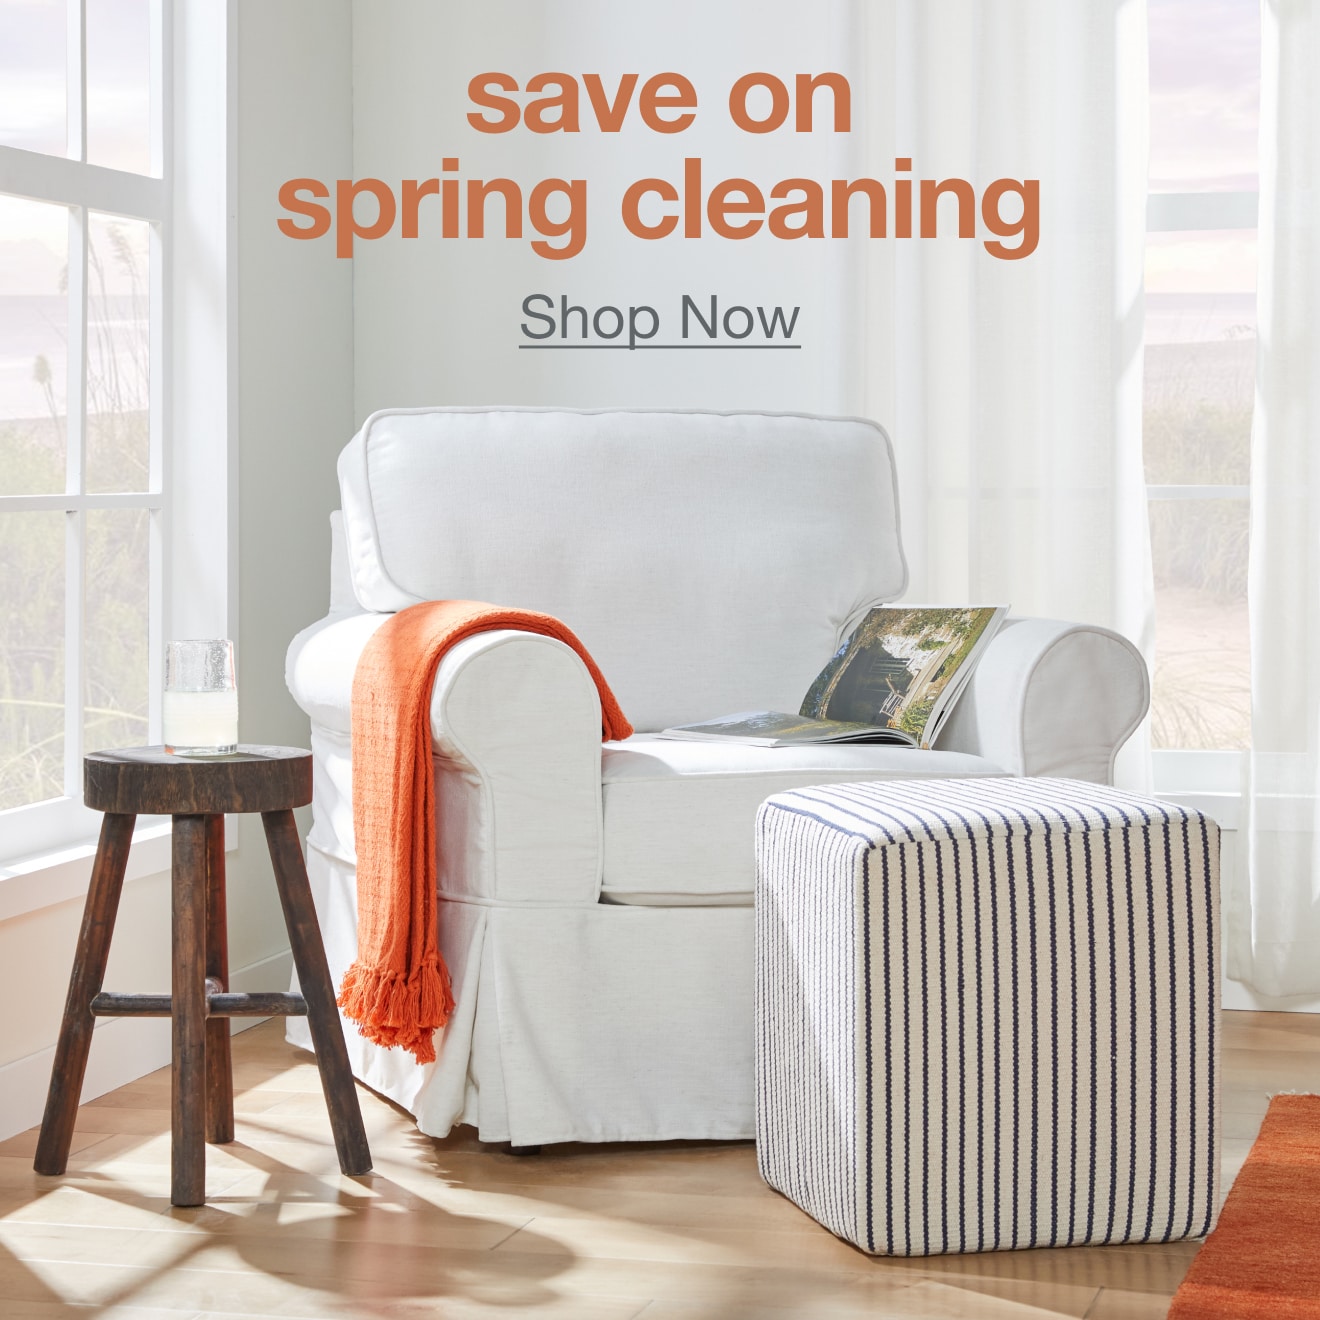 Save on Spring Cleaning